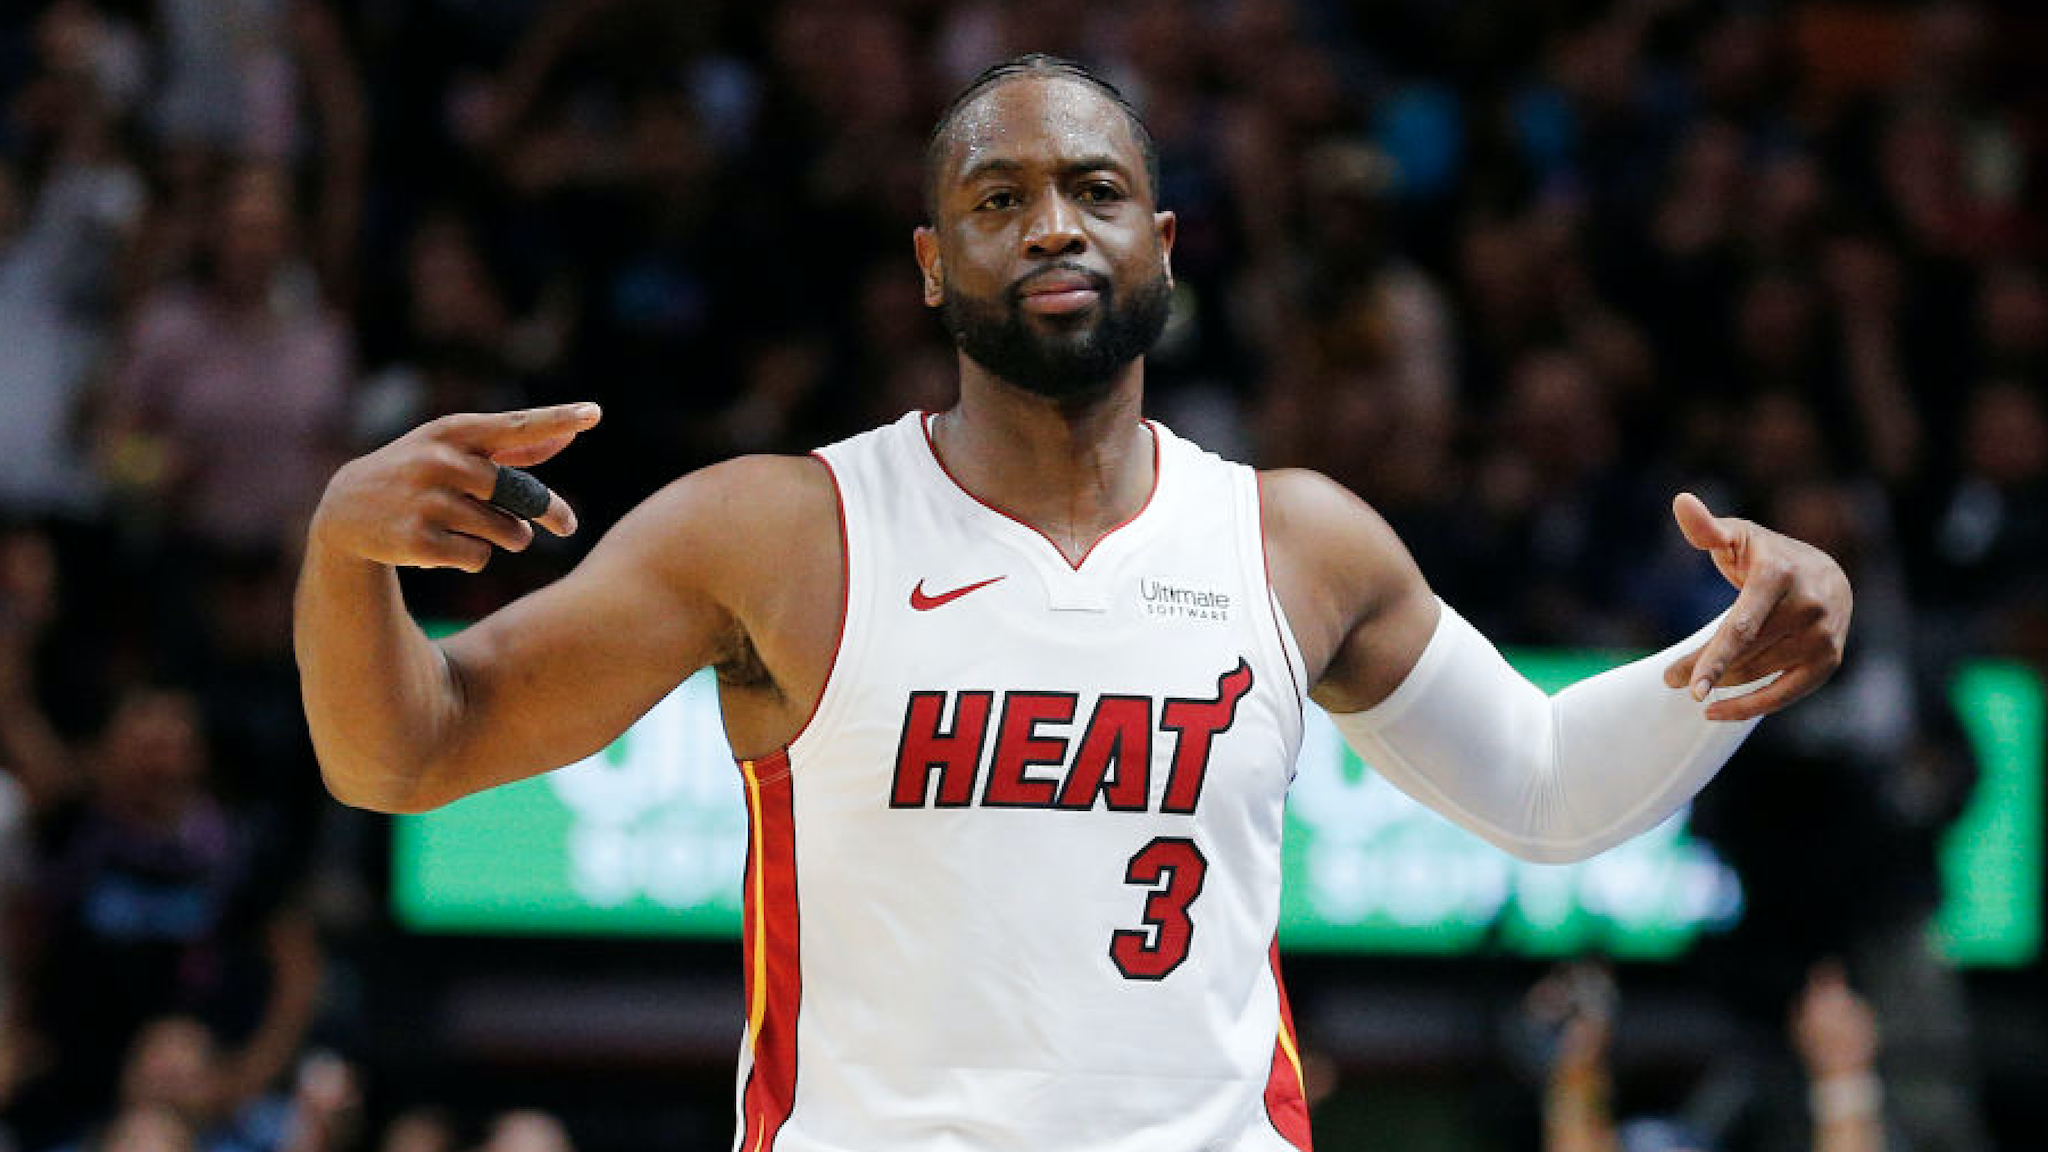 Dwyane Wade #3 of the Miami Heat reacts after hitting a three pointer against the Philadelphia 76ers during the second half at American Airlines Arena on April 09, 2019 in Miami, Florida.